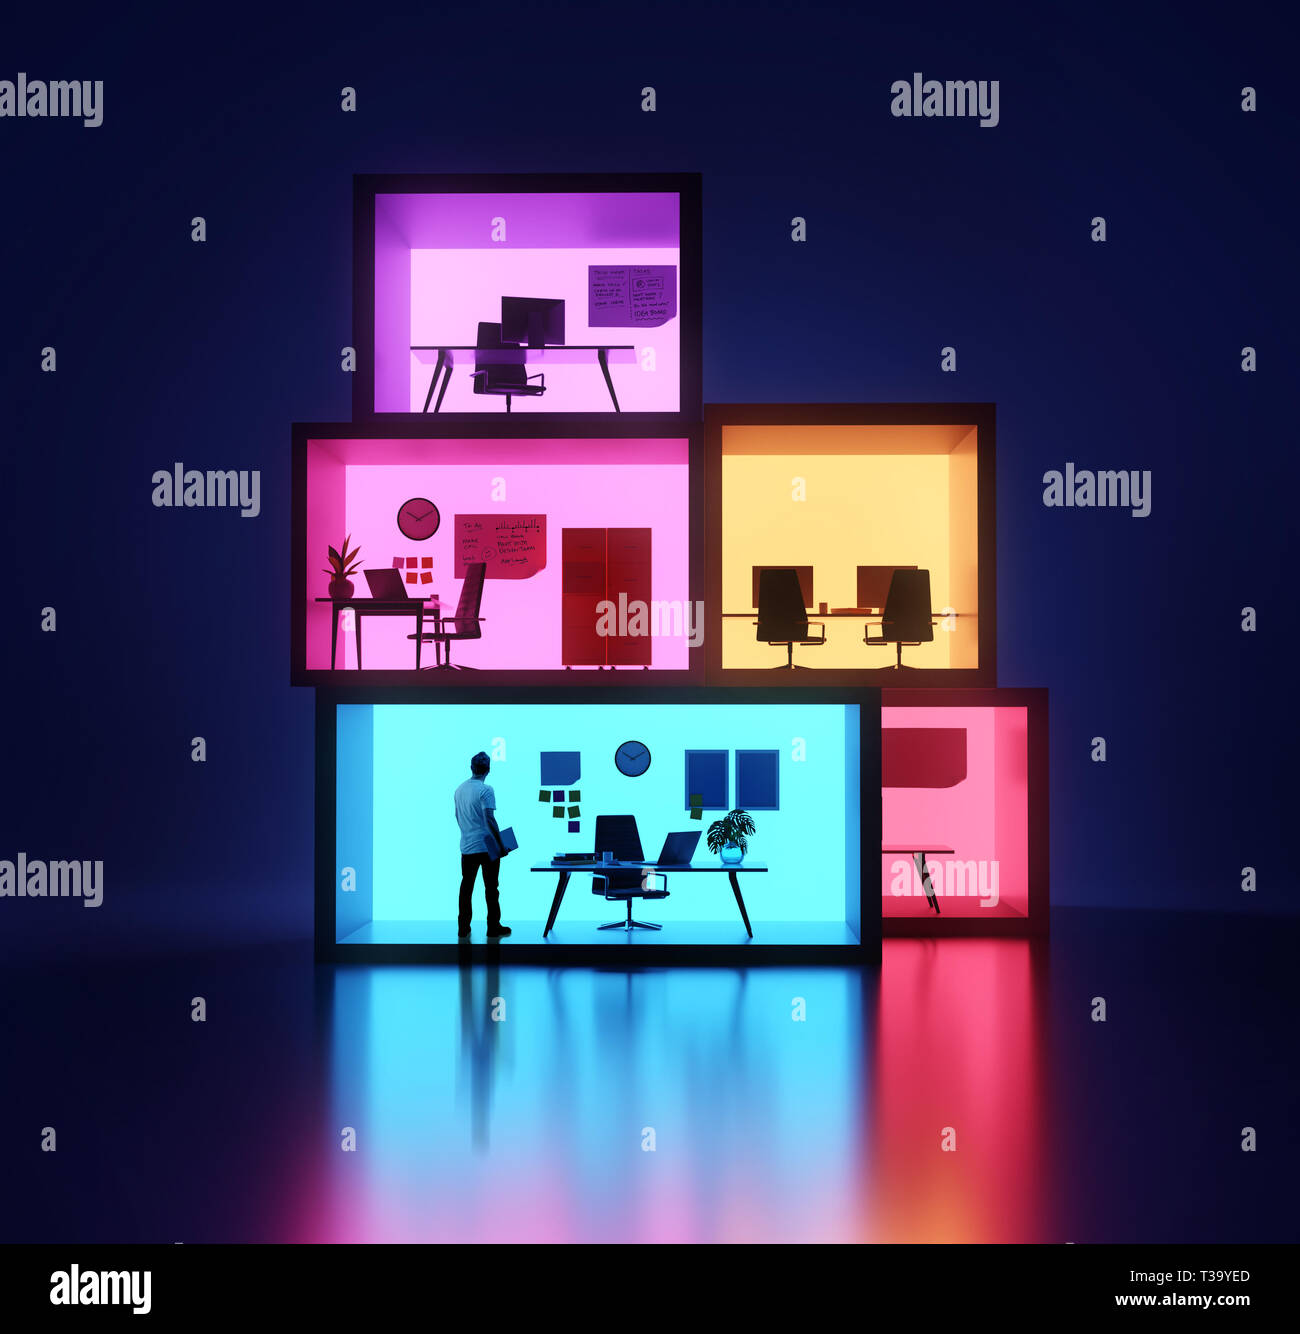 A businessman inside an office - Stacked and luminous office workplaces. Workplace 3D illustration. Stock Photo